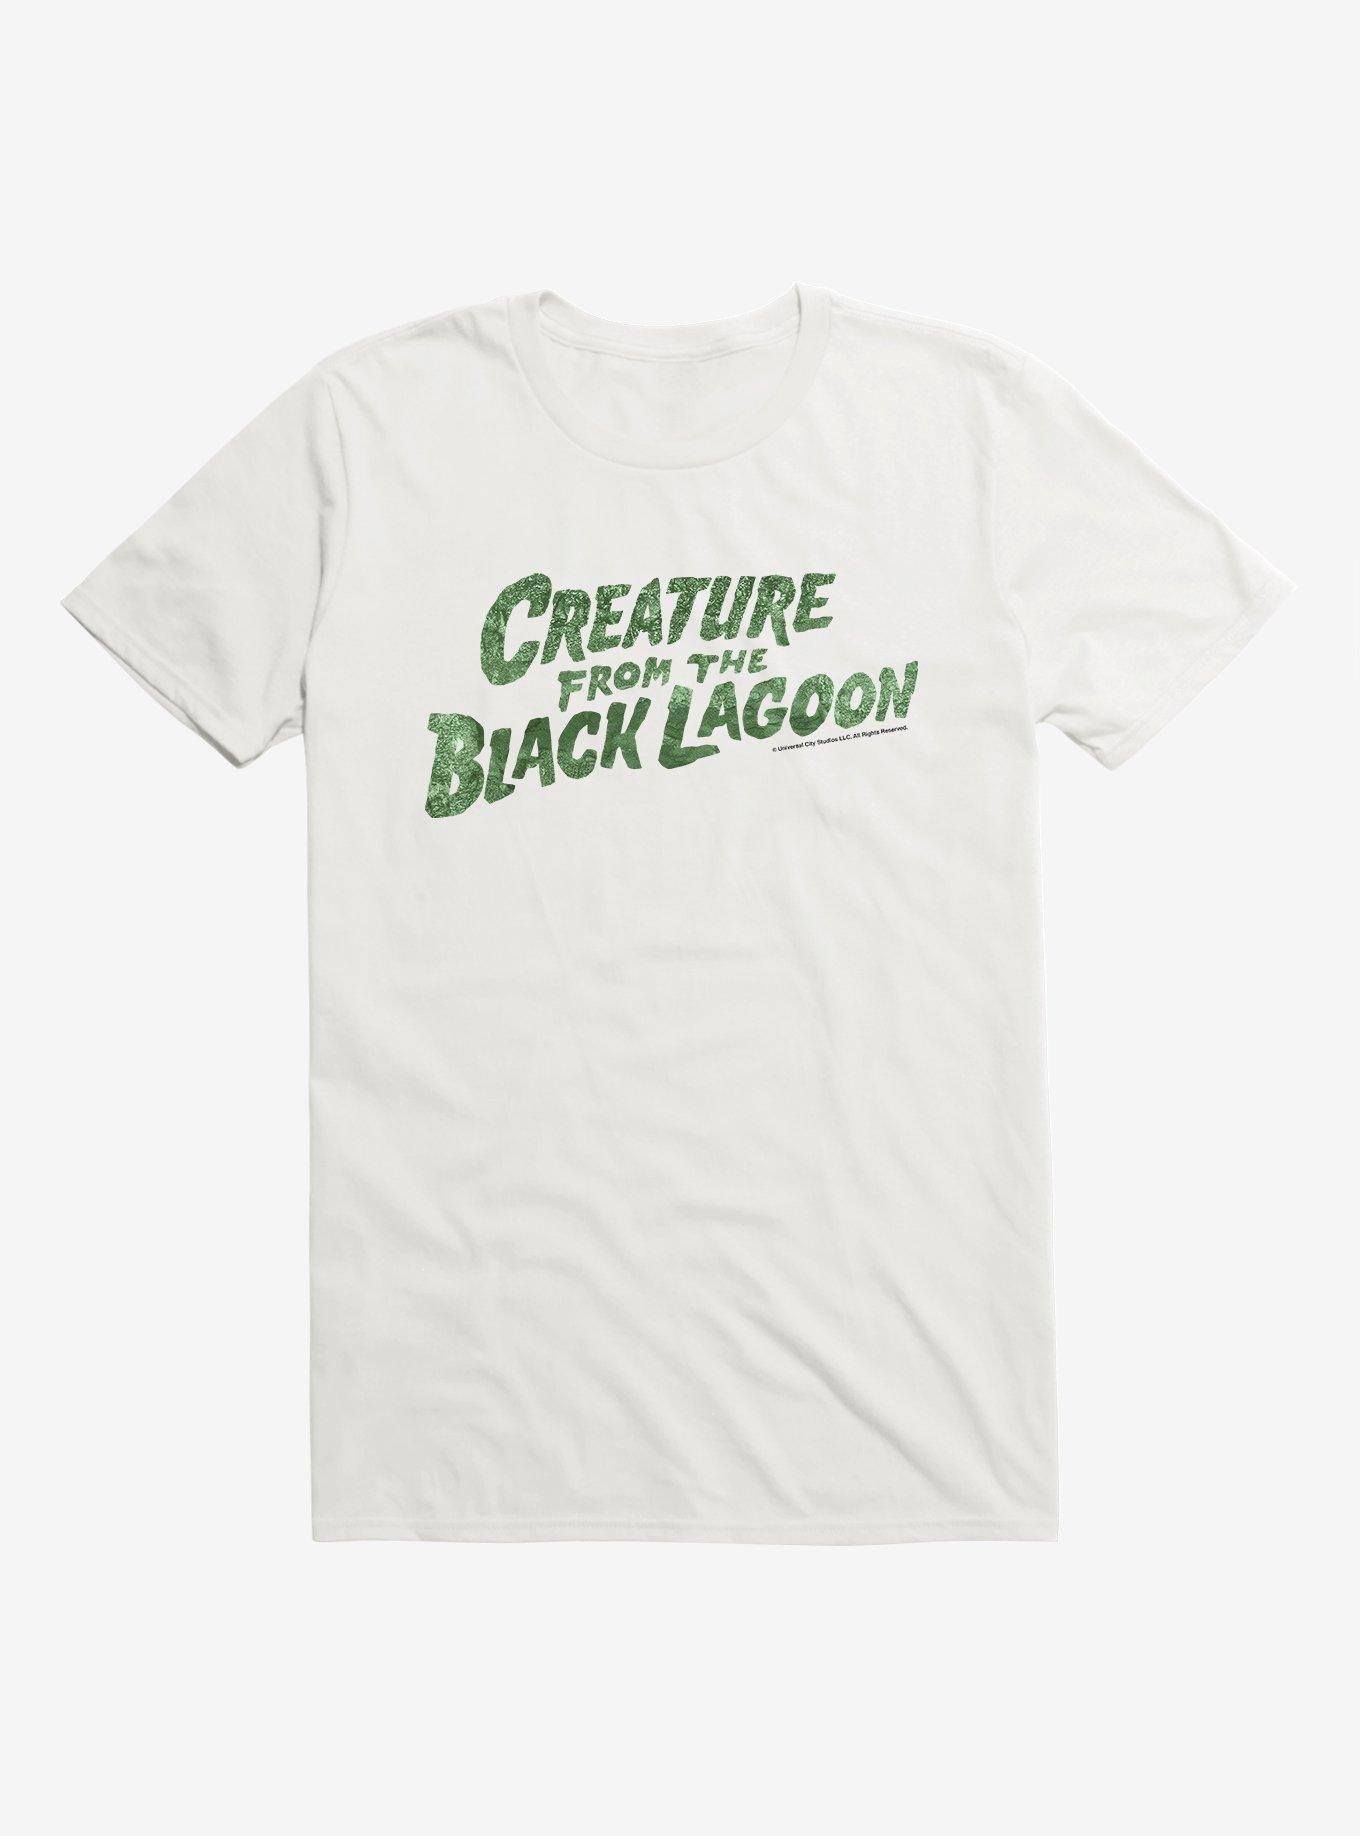 The Creature From The Black Lagoon Title T-Shirt, WHITE, hi-res